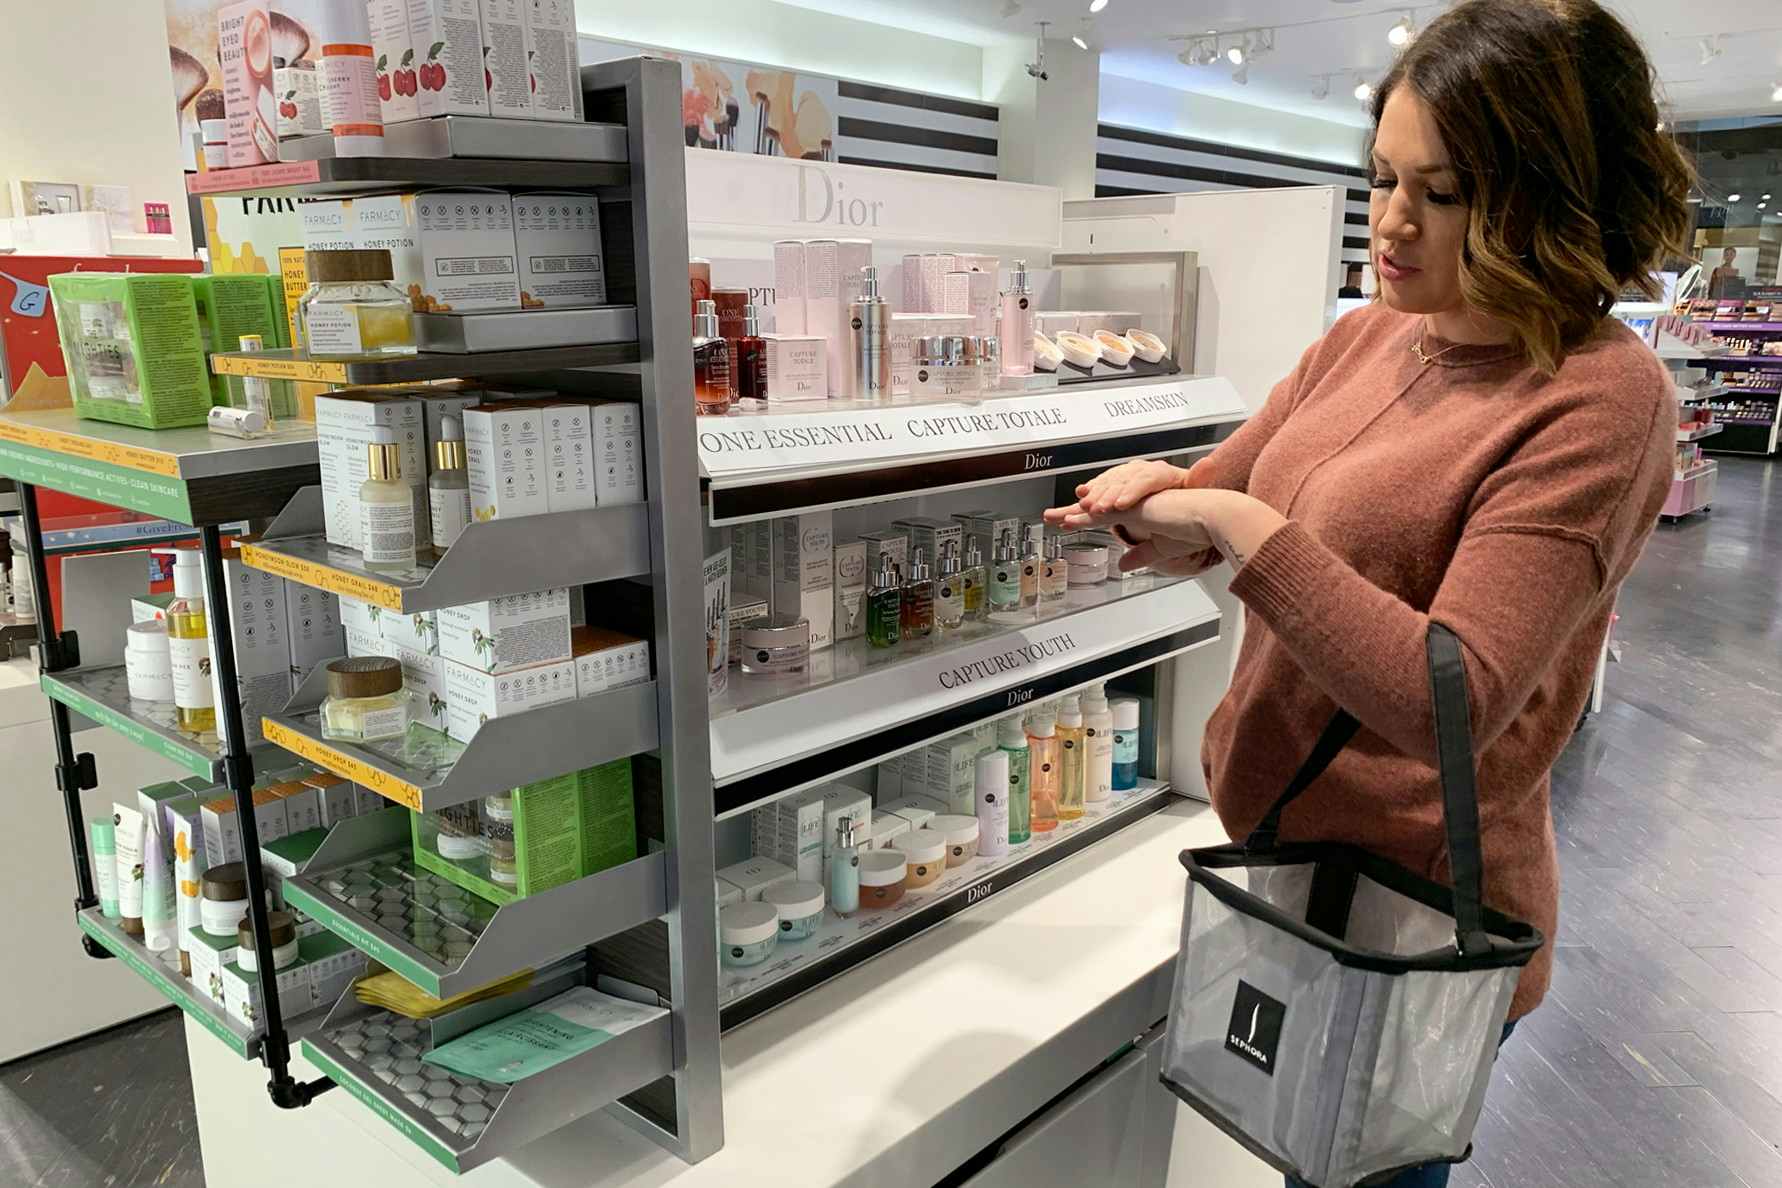 Woman trying Dior skin care from test container in Sephora.